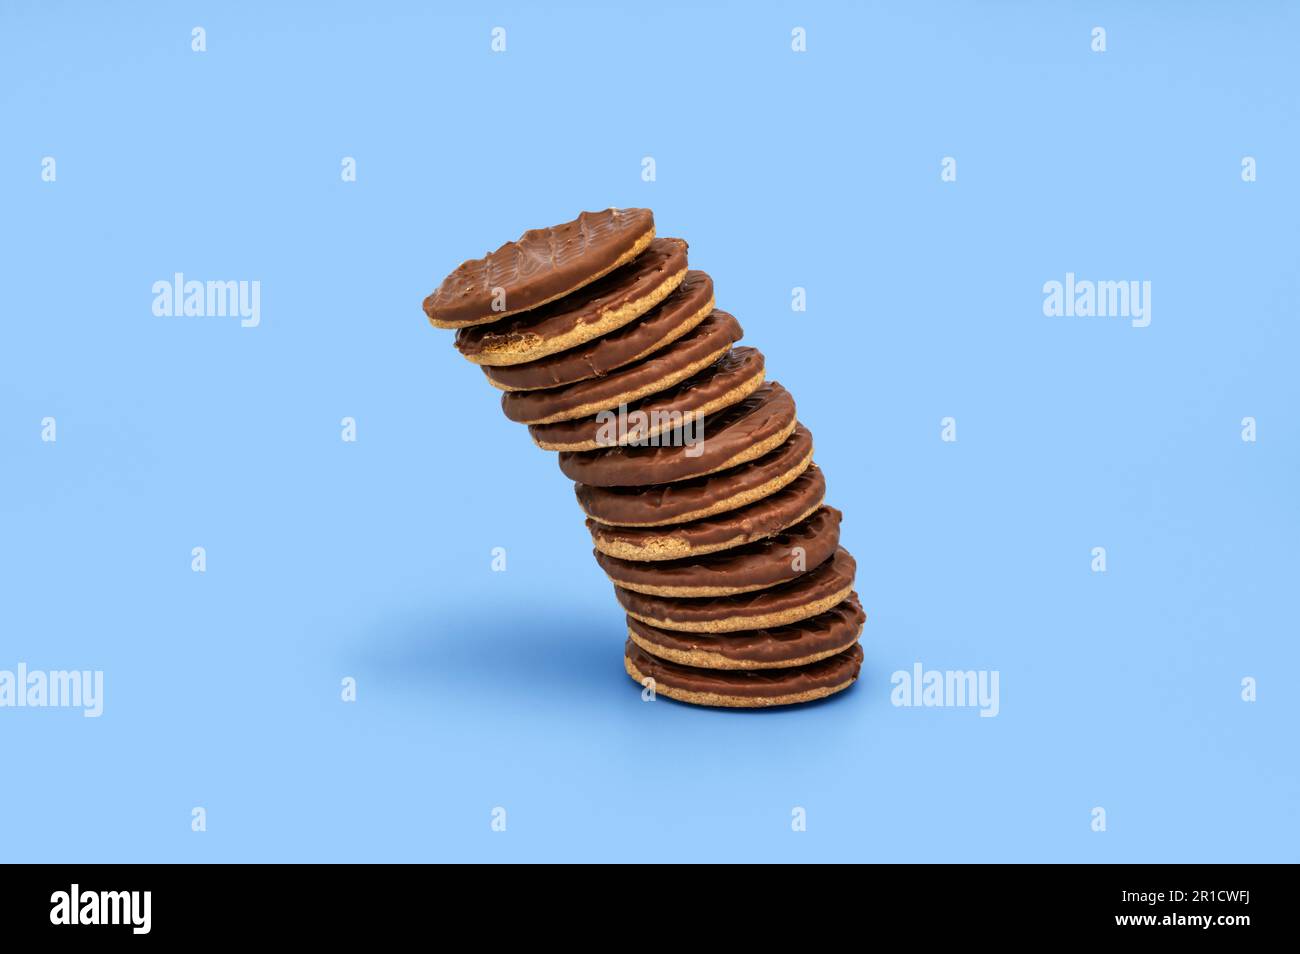 Stacked chocolate biscuits on plain blue background Stock Photo